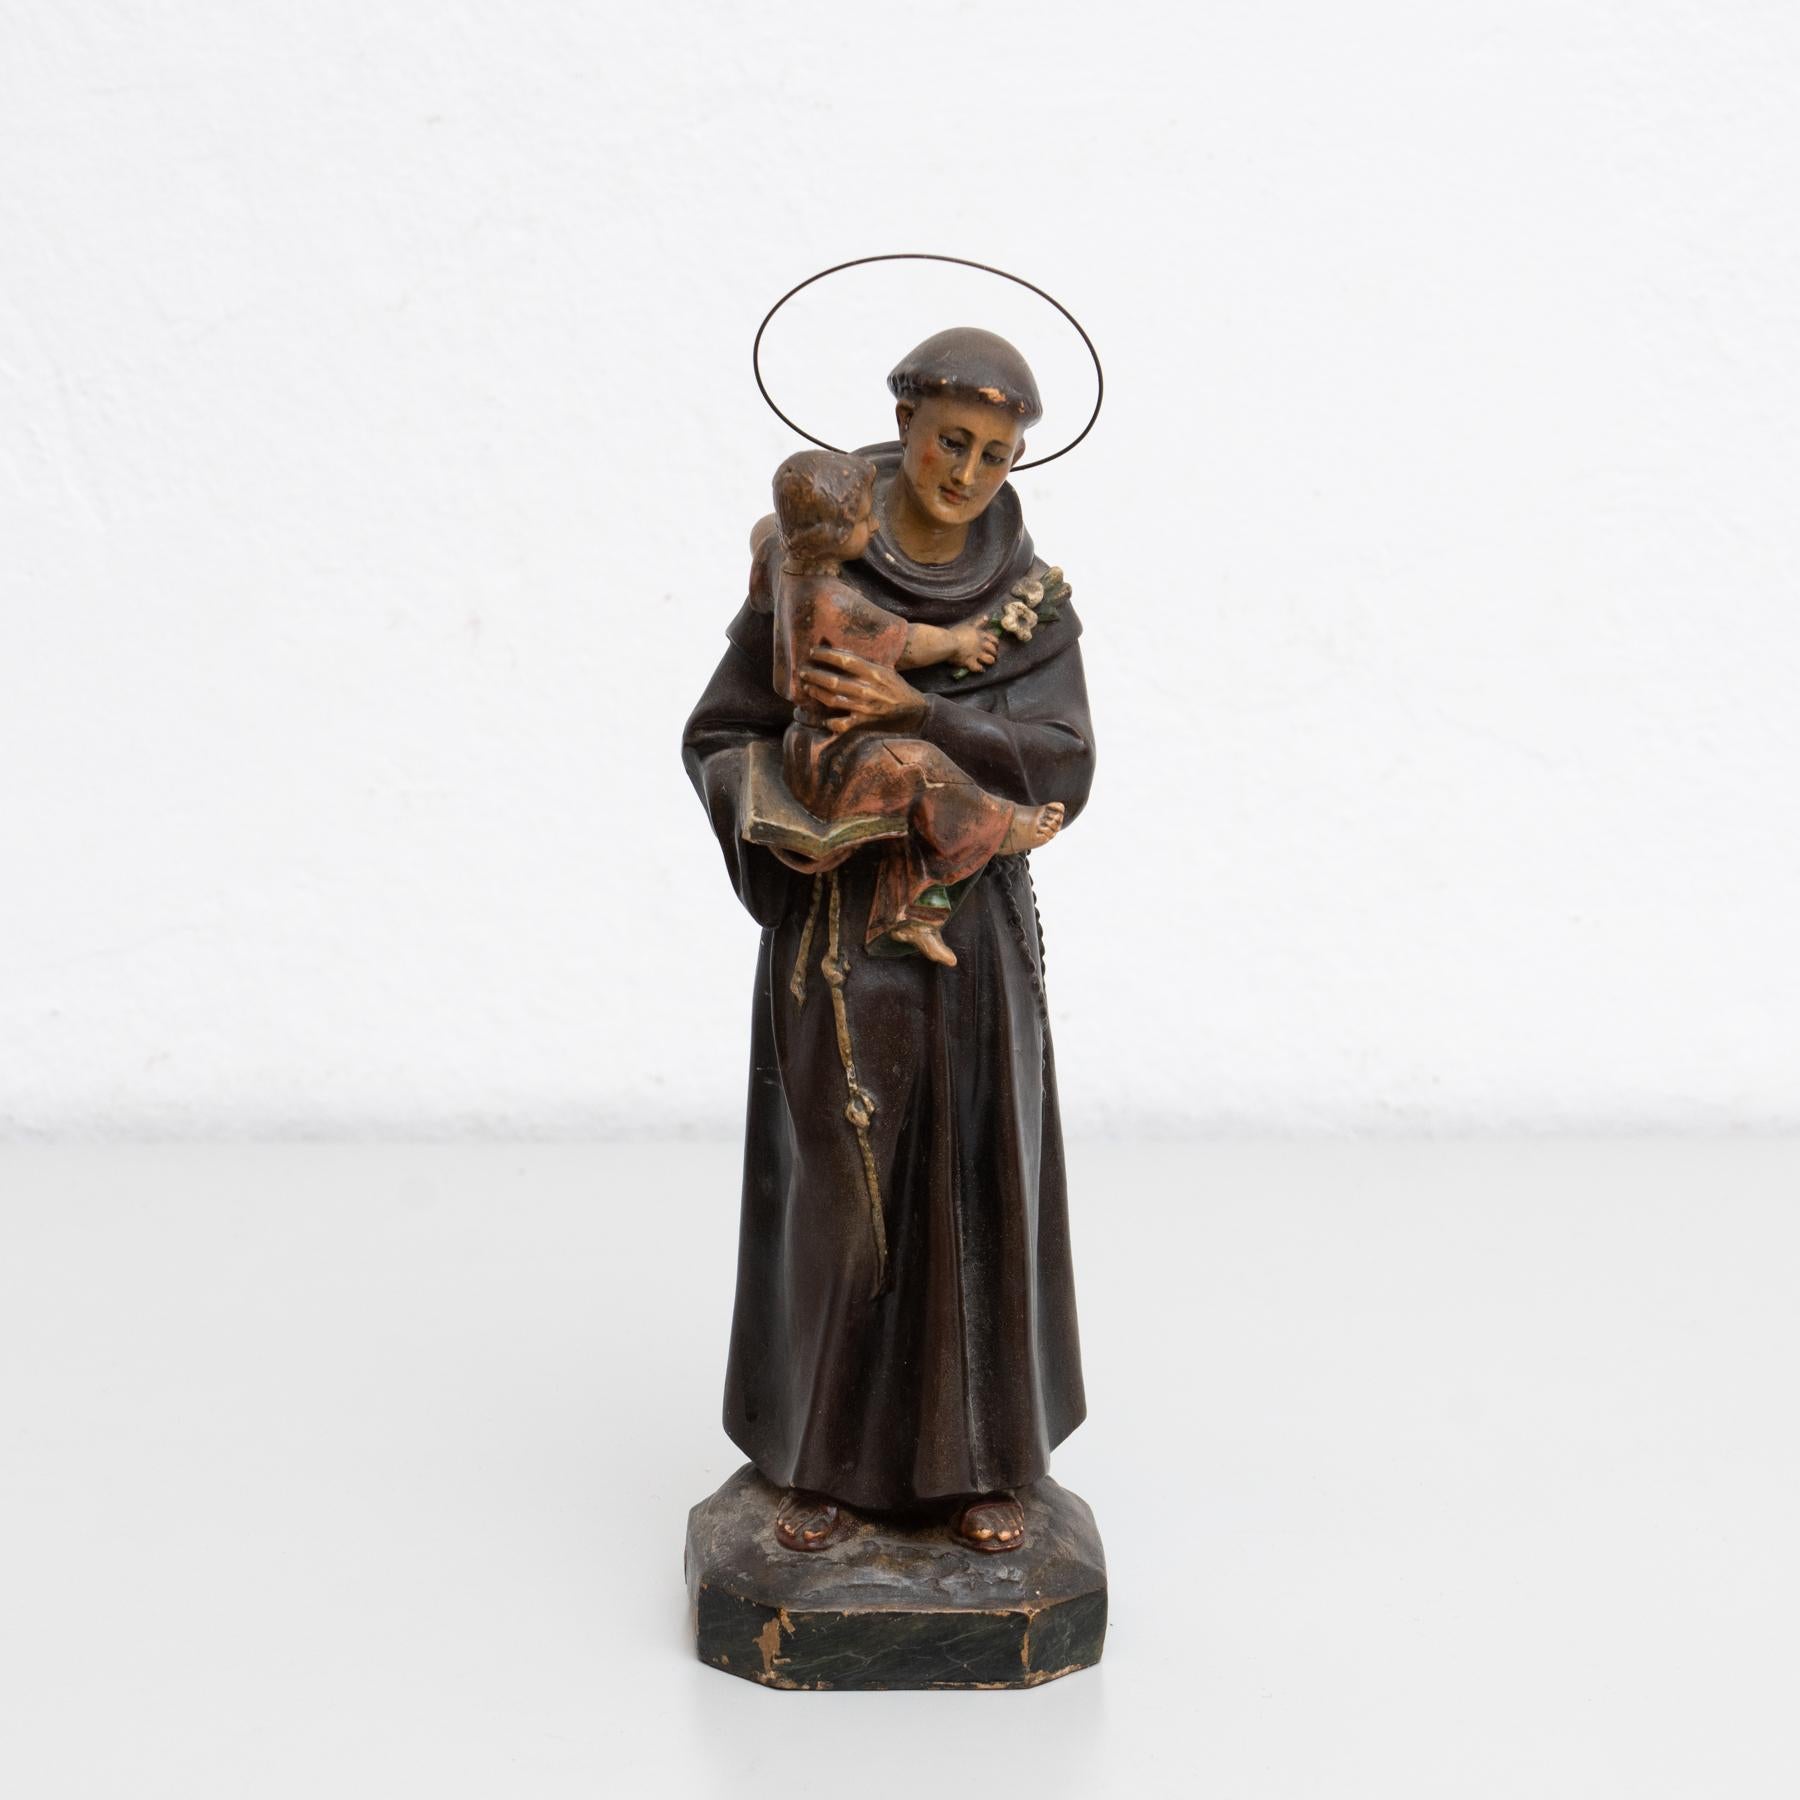 Traditional religious hand painted plaster figure of a Saint.

Signed.

Made in traditional Catalan atelier in Olot, Spain, circa 1930.

In original condition, with minor wear consistent with age and use, preserving a beautiful